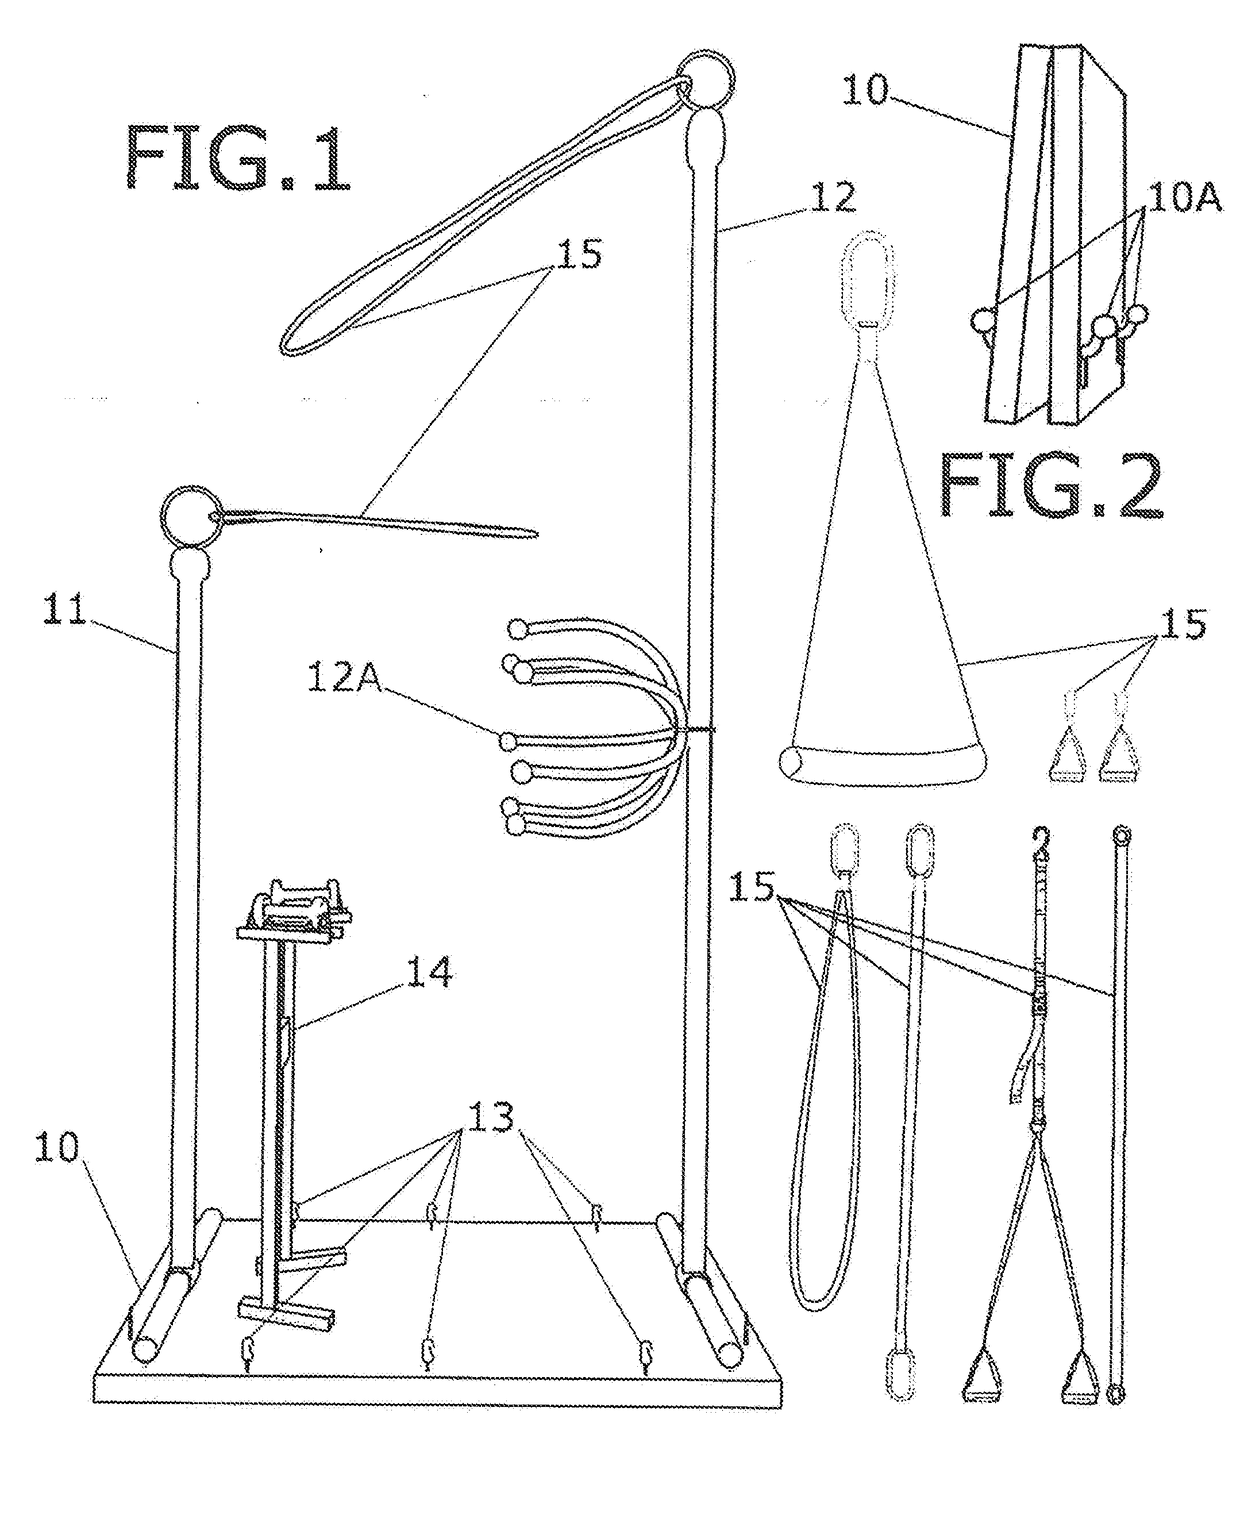 Body alignment and correction device